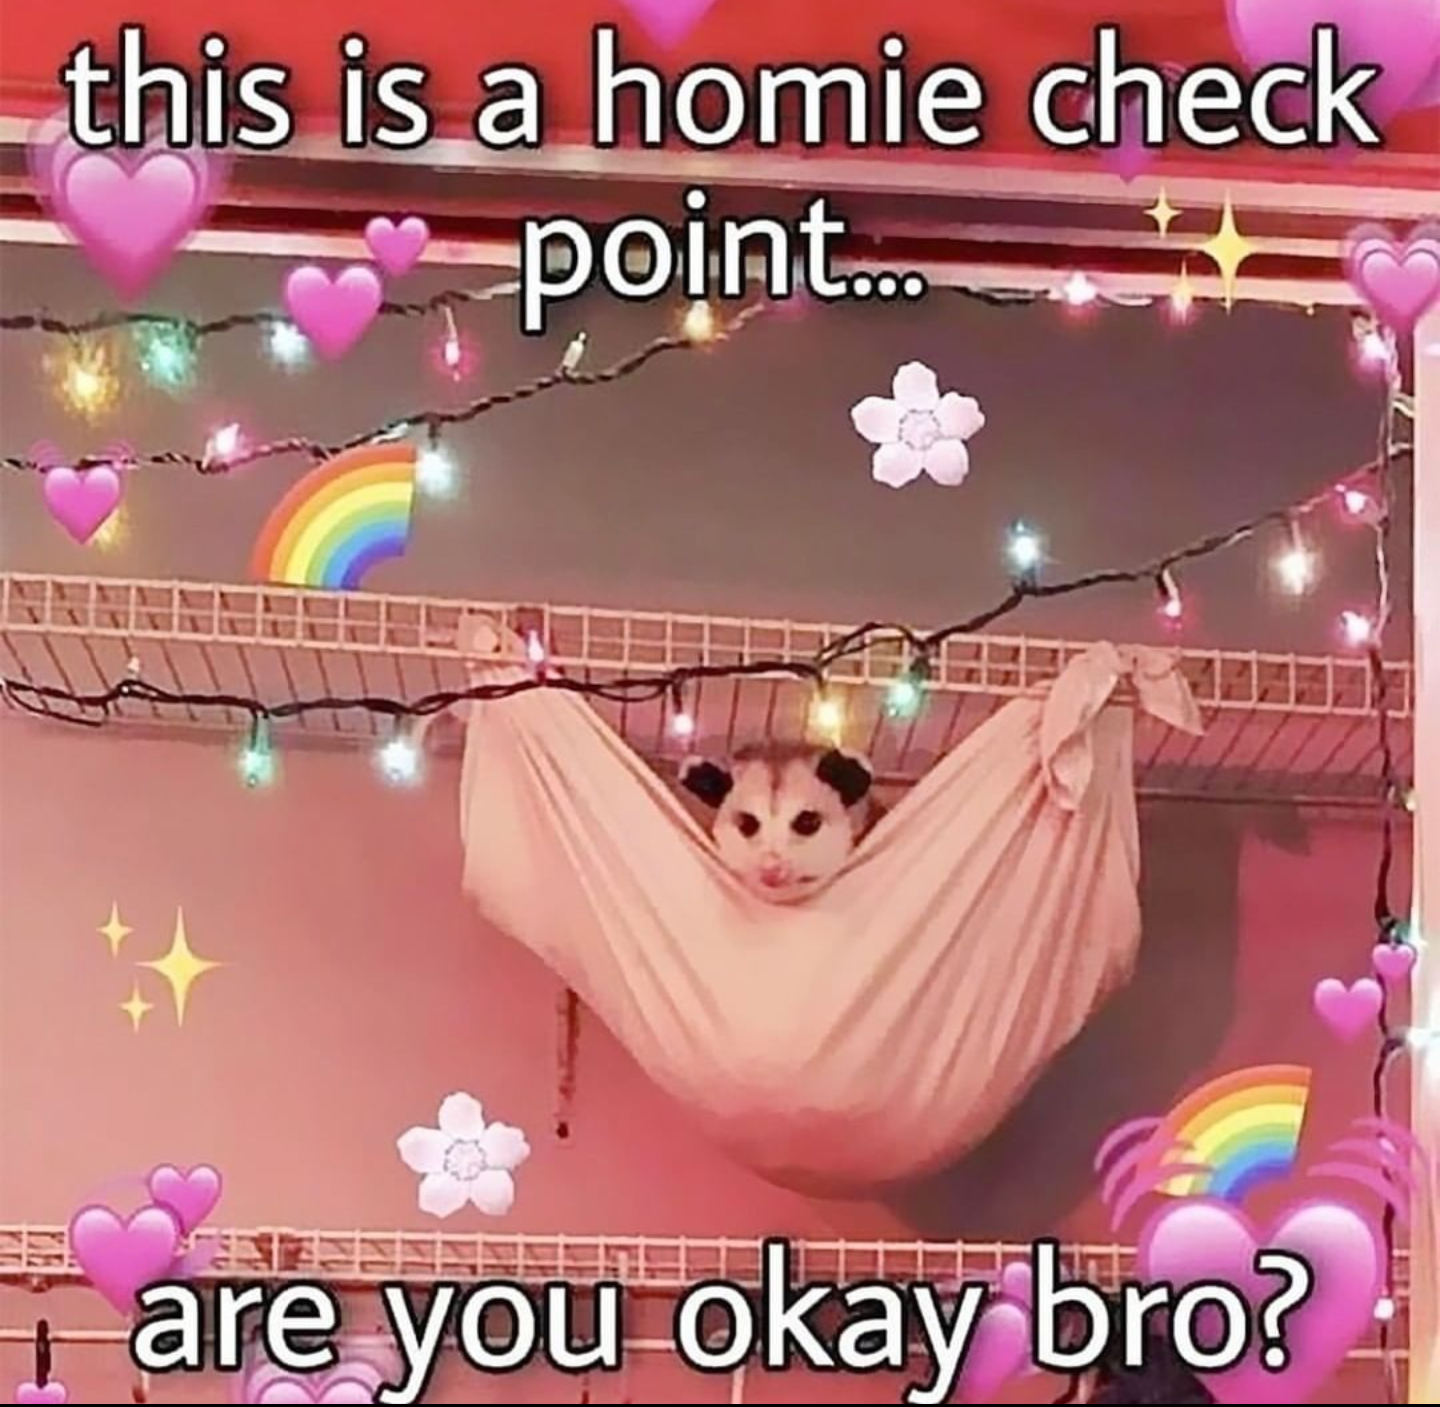 funny memes --  homie checkpoint meme - this is a homie check point... are you okay bro?